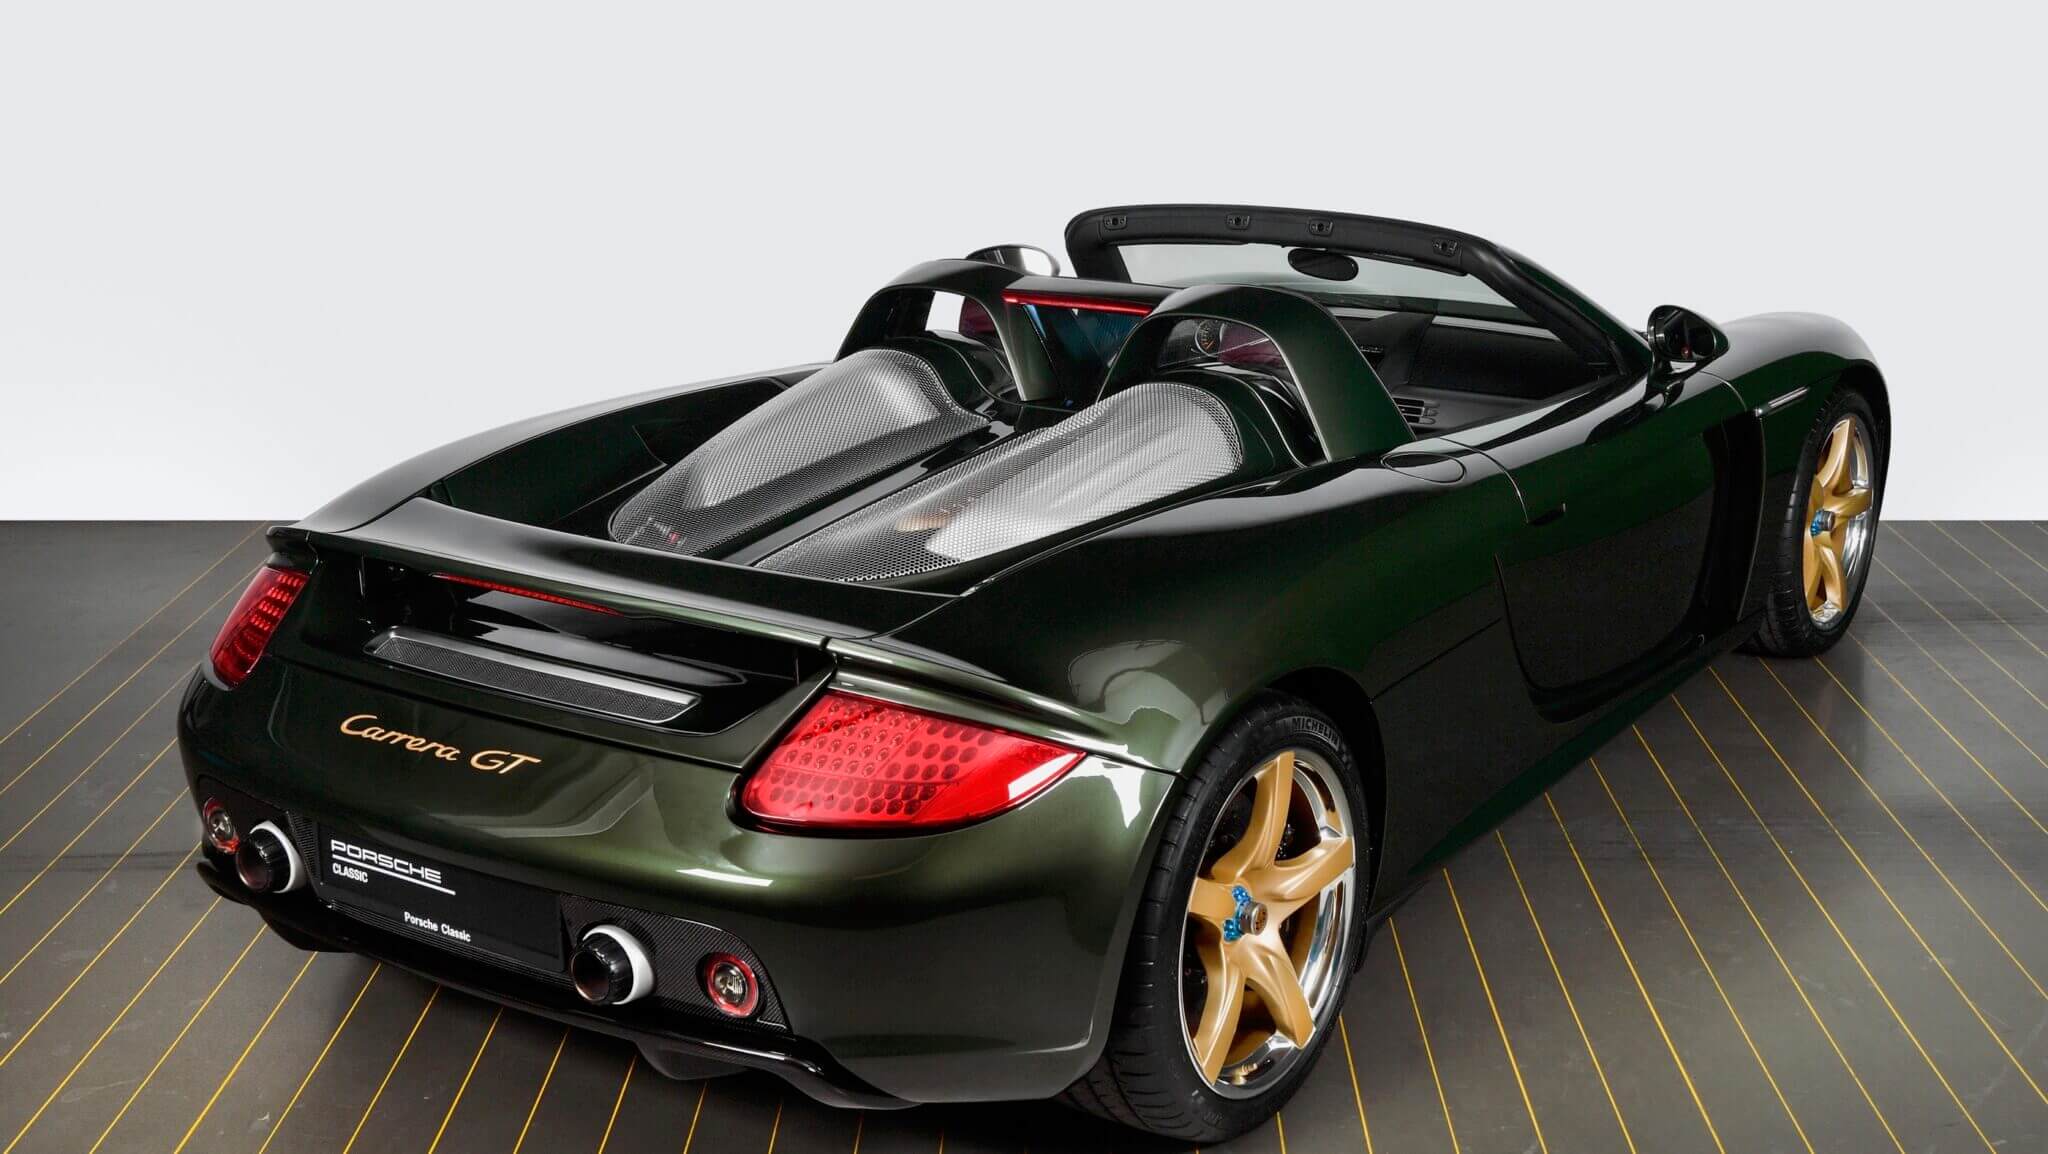 This Restored Porsche Carrera GT Is Now a Bespoke One-Off Thanks to Porsche  Classic – GTPlanet